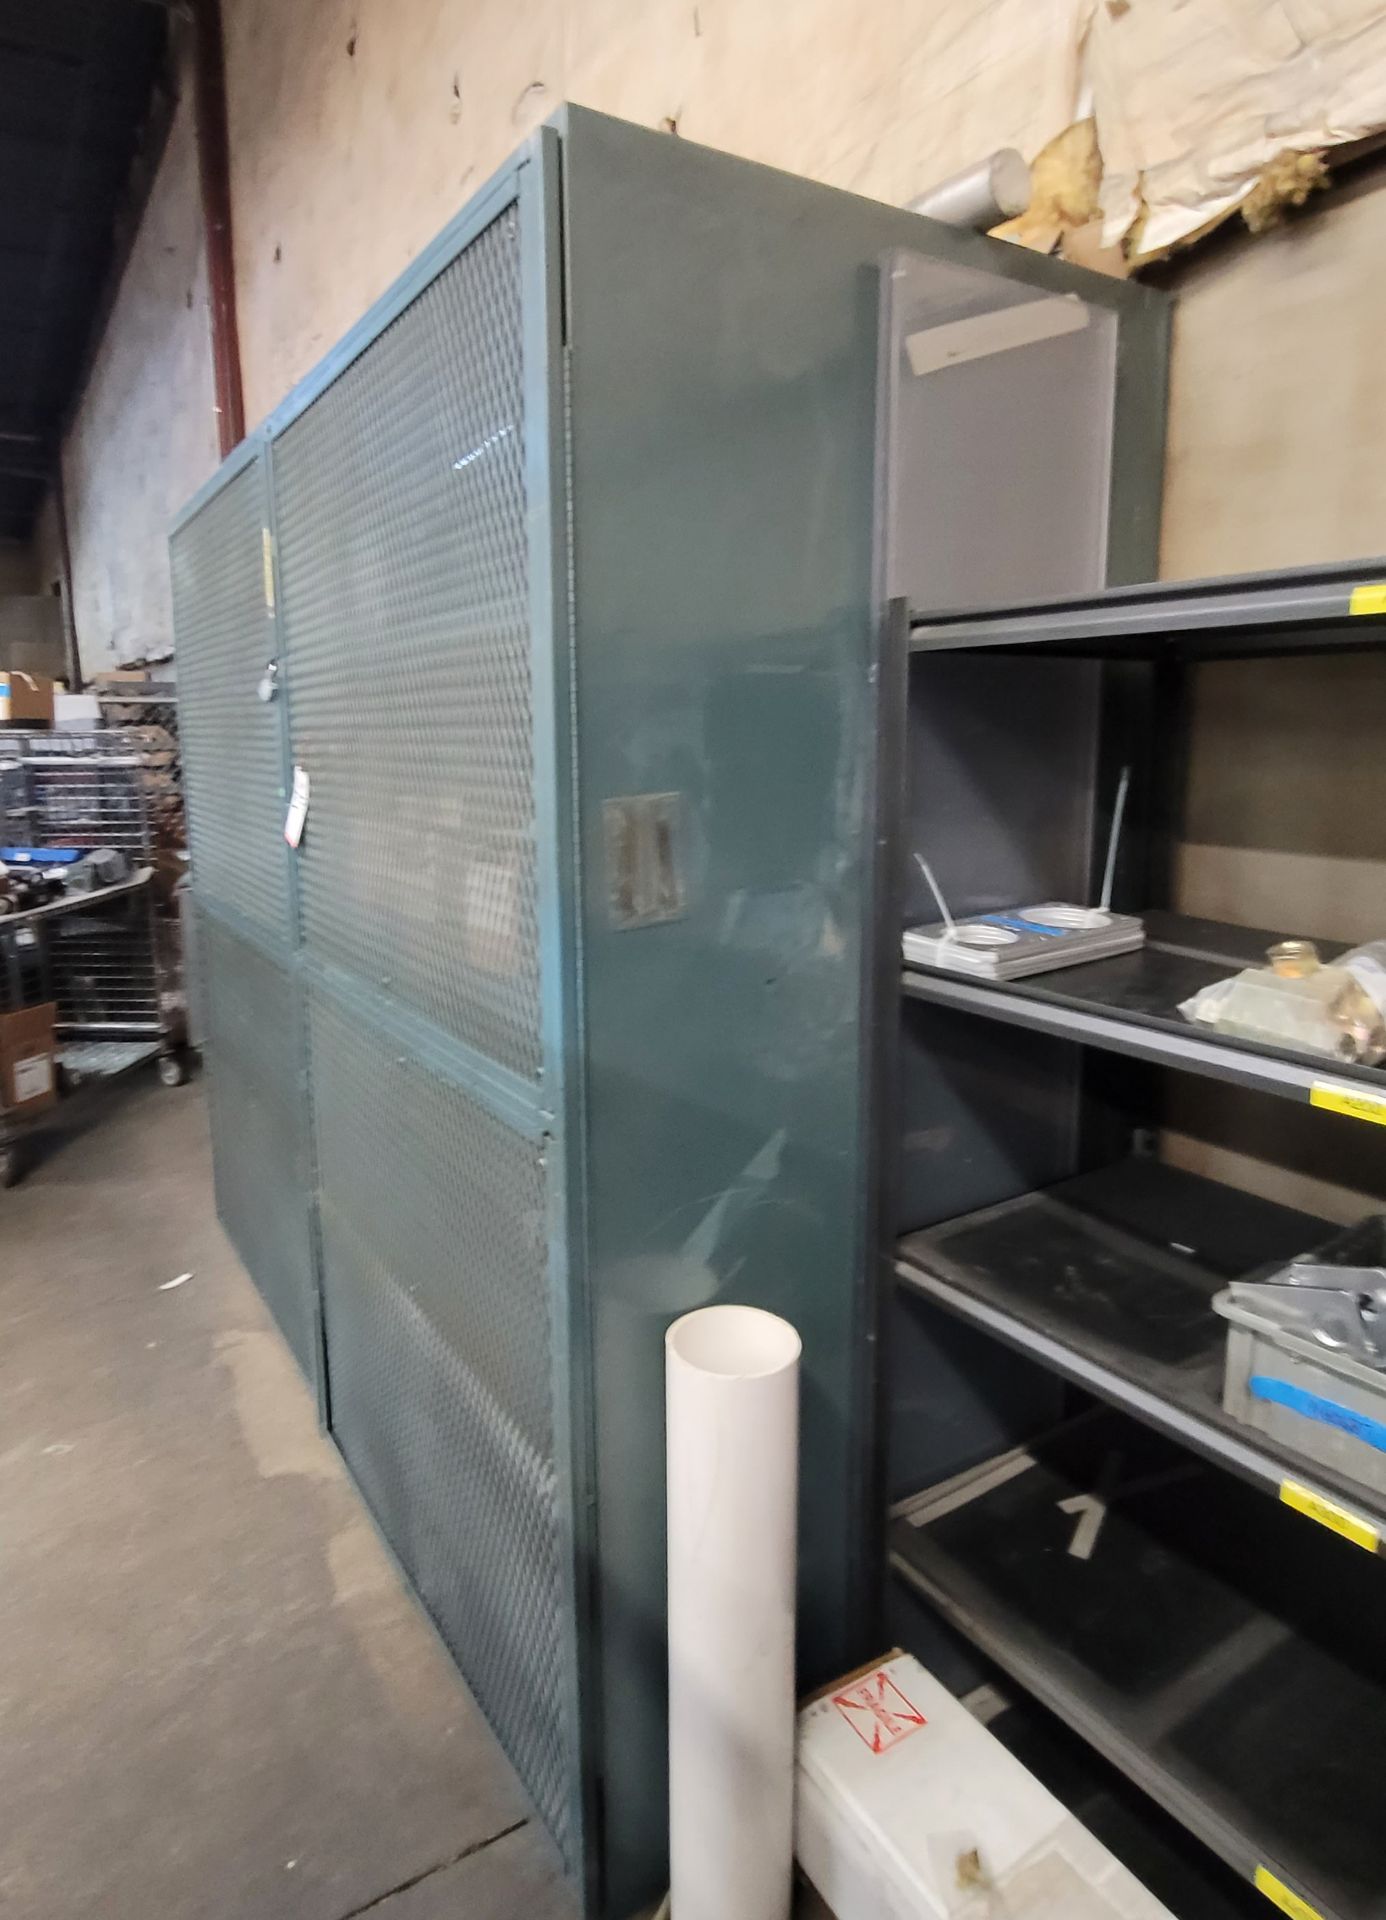 LARGE SECURITY STORAGE CABINET, 104" X 43-1/2" X 92" HT, CONTENTS NOT INCLUDED - Image 2 of 3